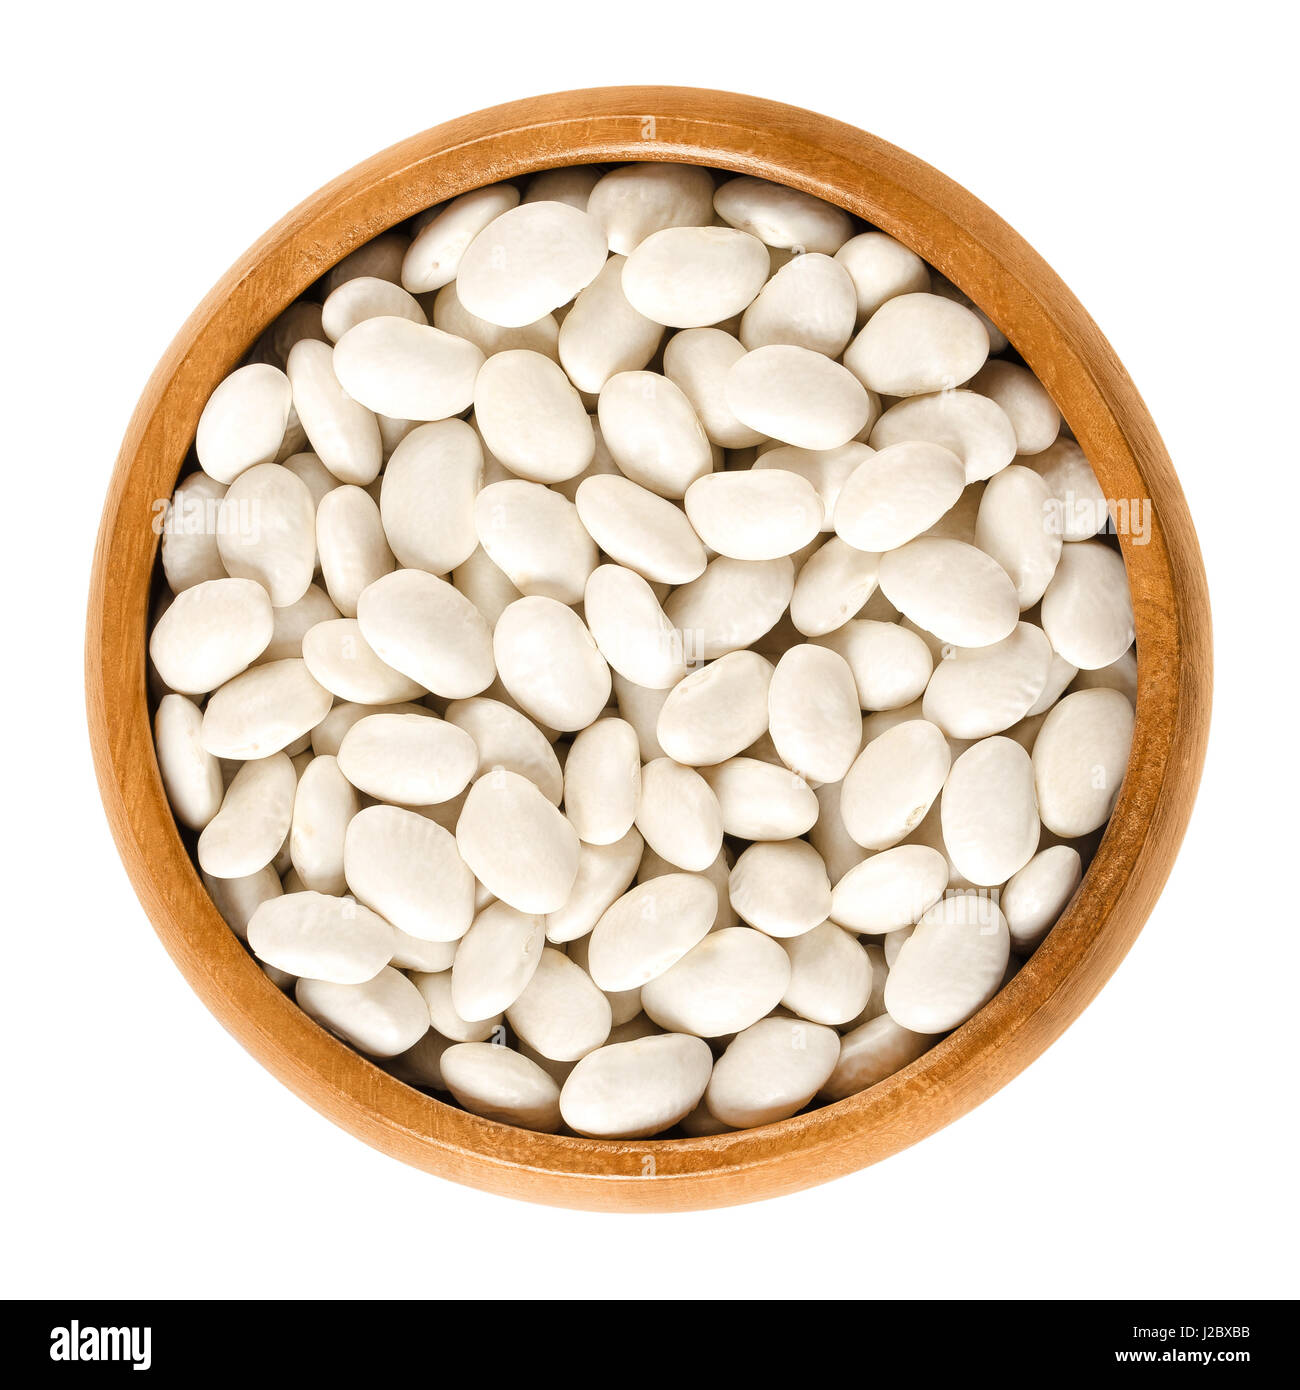 White navy beans in wooden bowl, also haricot, pearl haricot, boston, white or pea bean. Dried seeds of Phaseolus vulgaris, a legume. Stock Photo